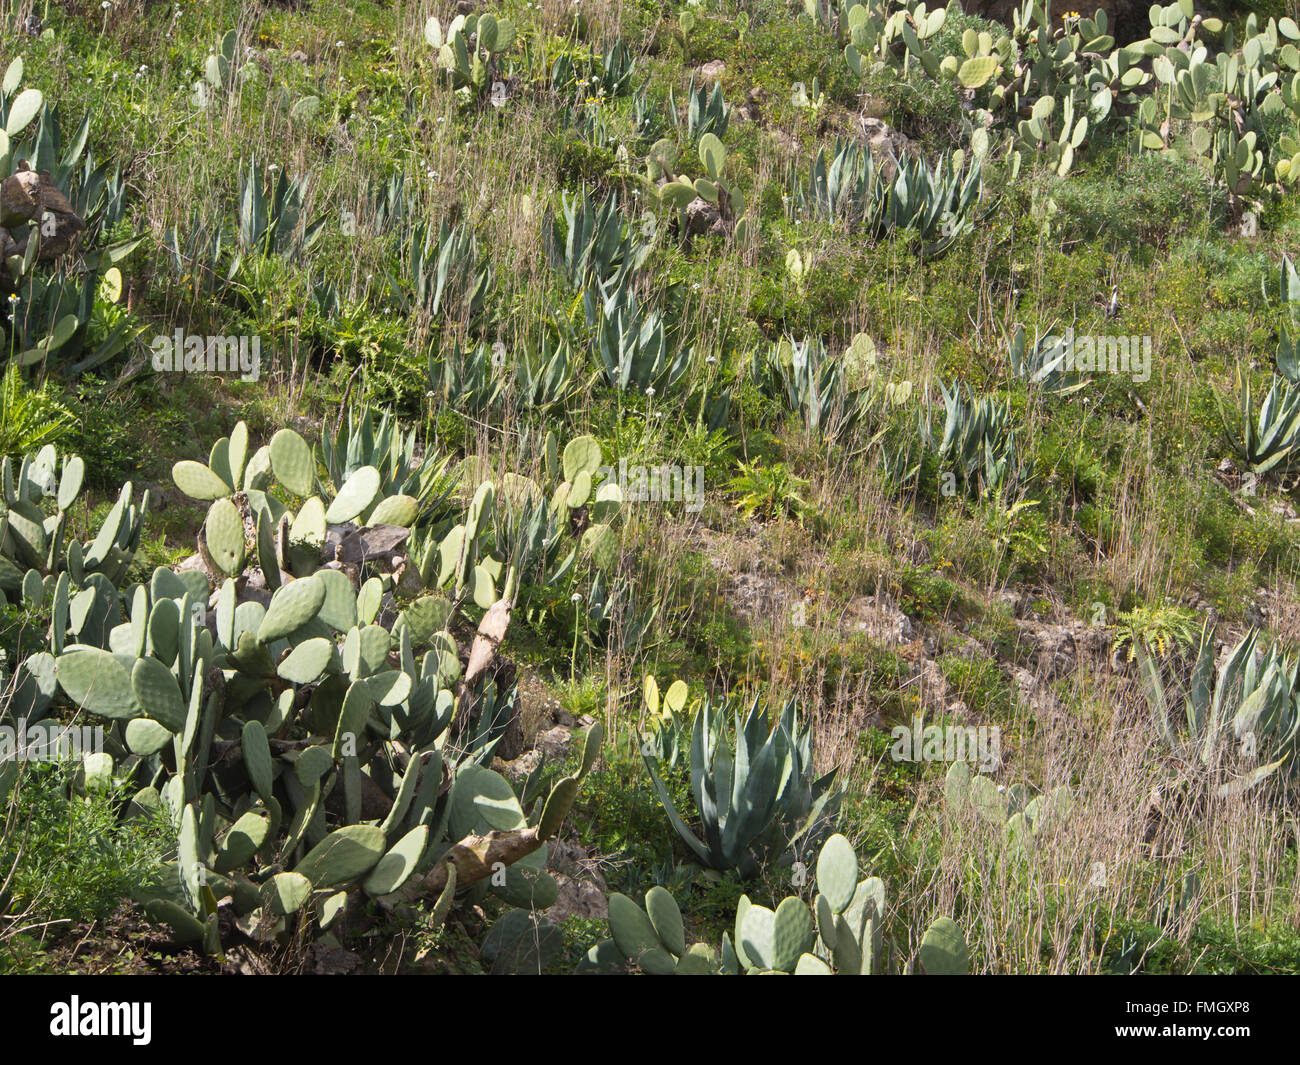 Prickly pear Opuntia dillenii and Agave americana dominating a mountainside near a footpath in Erjos del Tanque, Tenerife Stock Photo